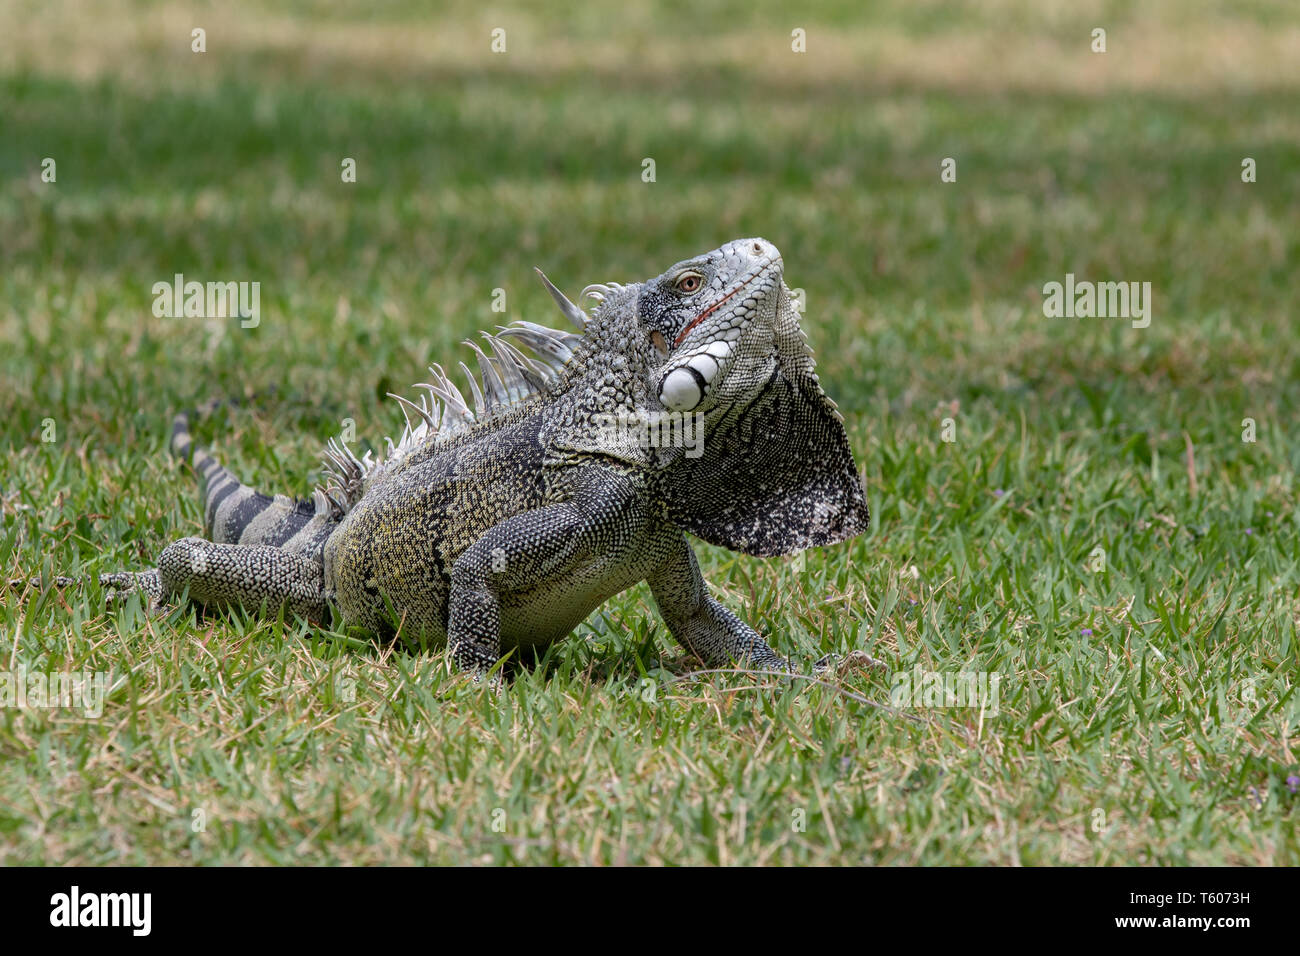 A green iguana displays its dewlap in Curacao Stock Photo